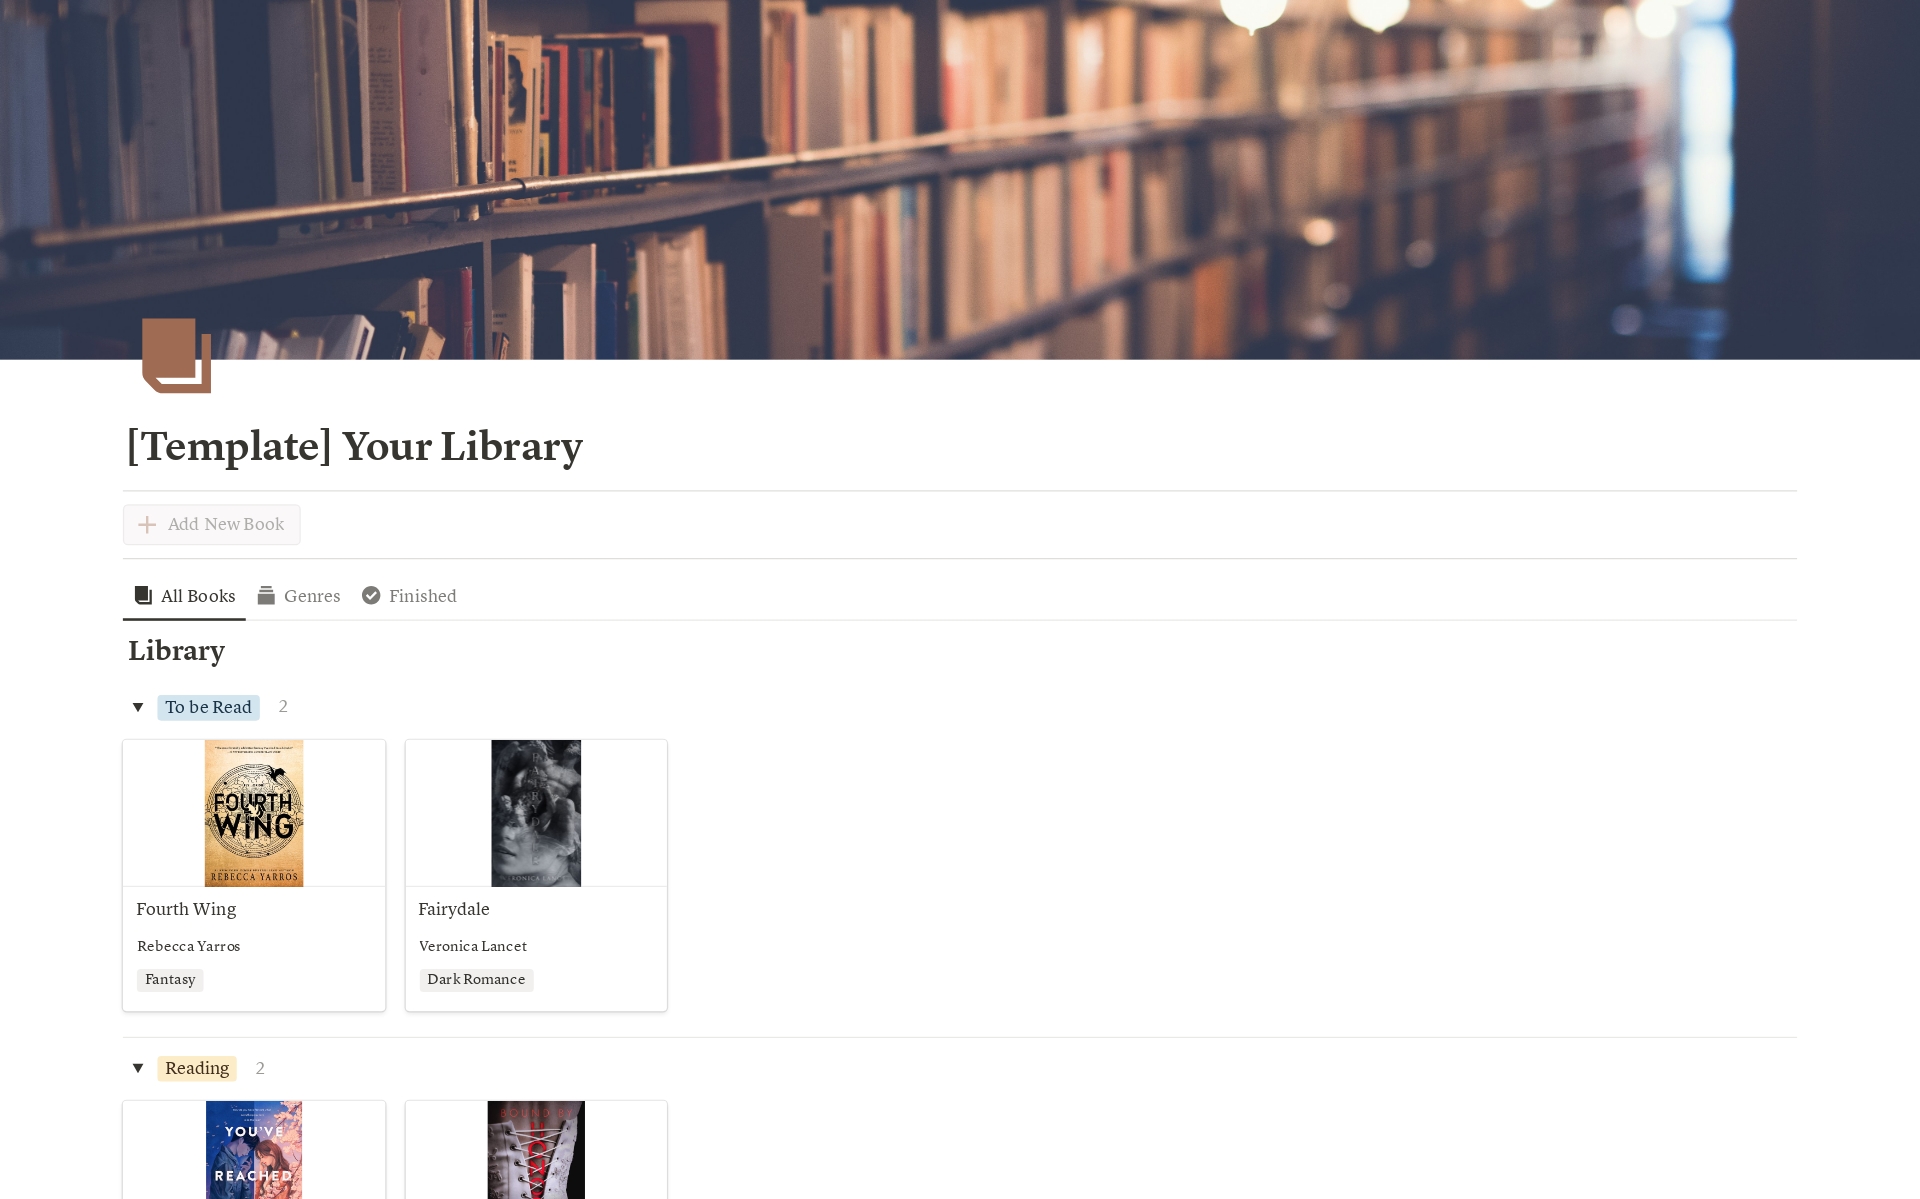 Introducing a user-friendly library template designed to simplify your book management. Easily organize your collection, track borrowed books, and discover new reads all in one place. Streamline your library experience with this simple yet effective Notion template. 